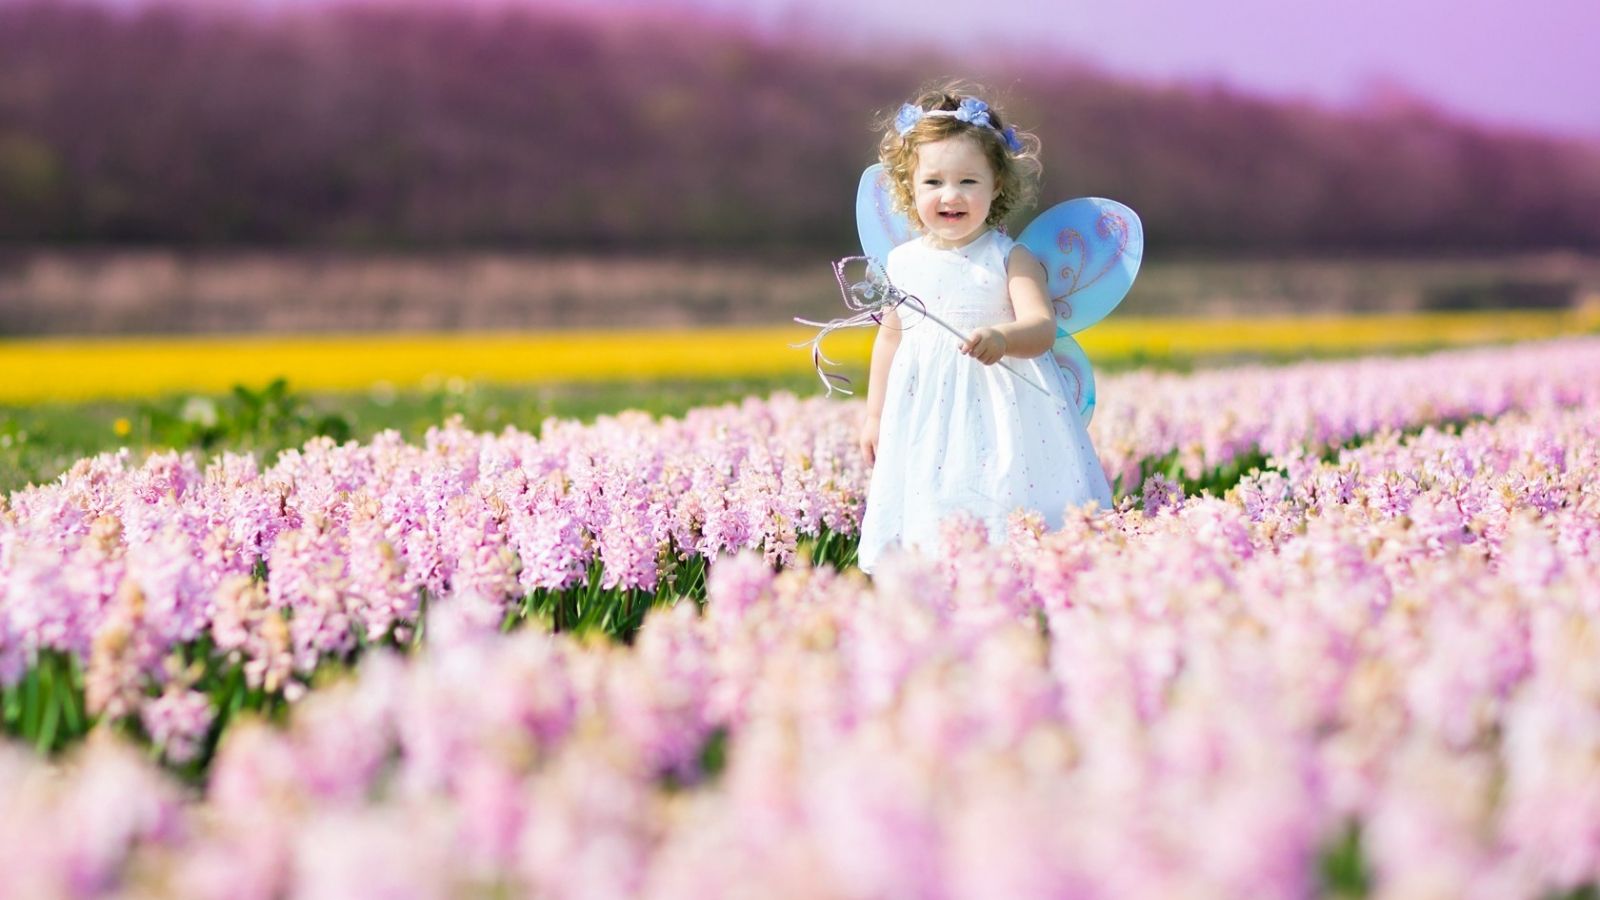 Free download Cute Baby in Spring Flower Field Image New HD